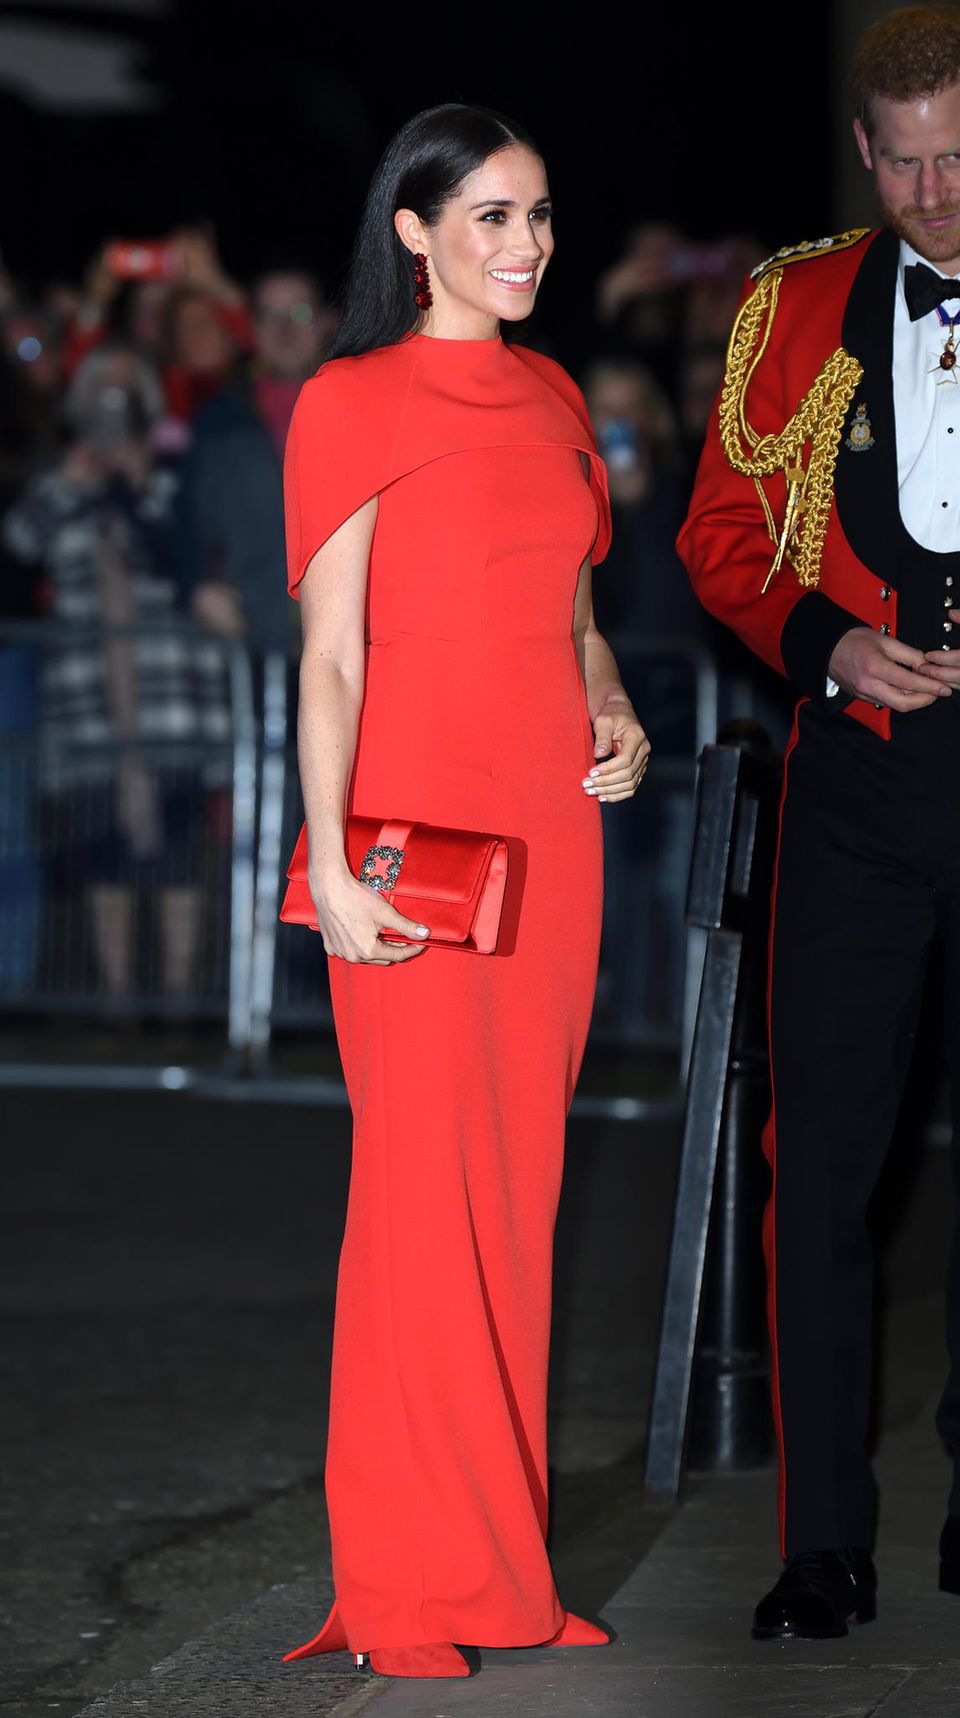 Duchess Meghan at the Mountbatten Festival of Music at the Royal Albert Hall in March 2020.